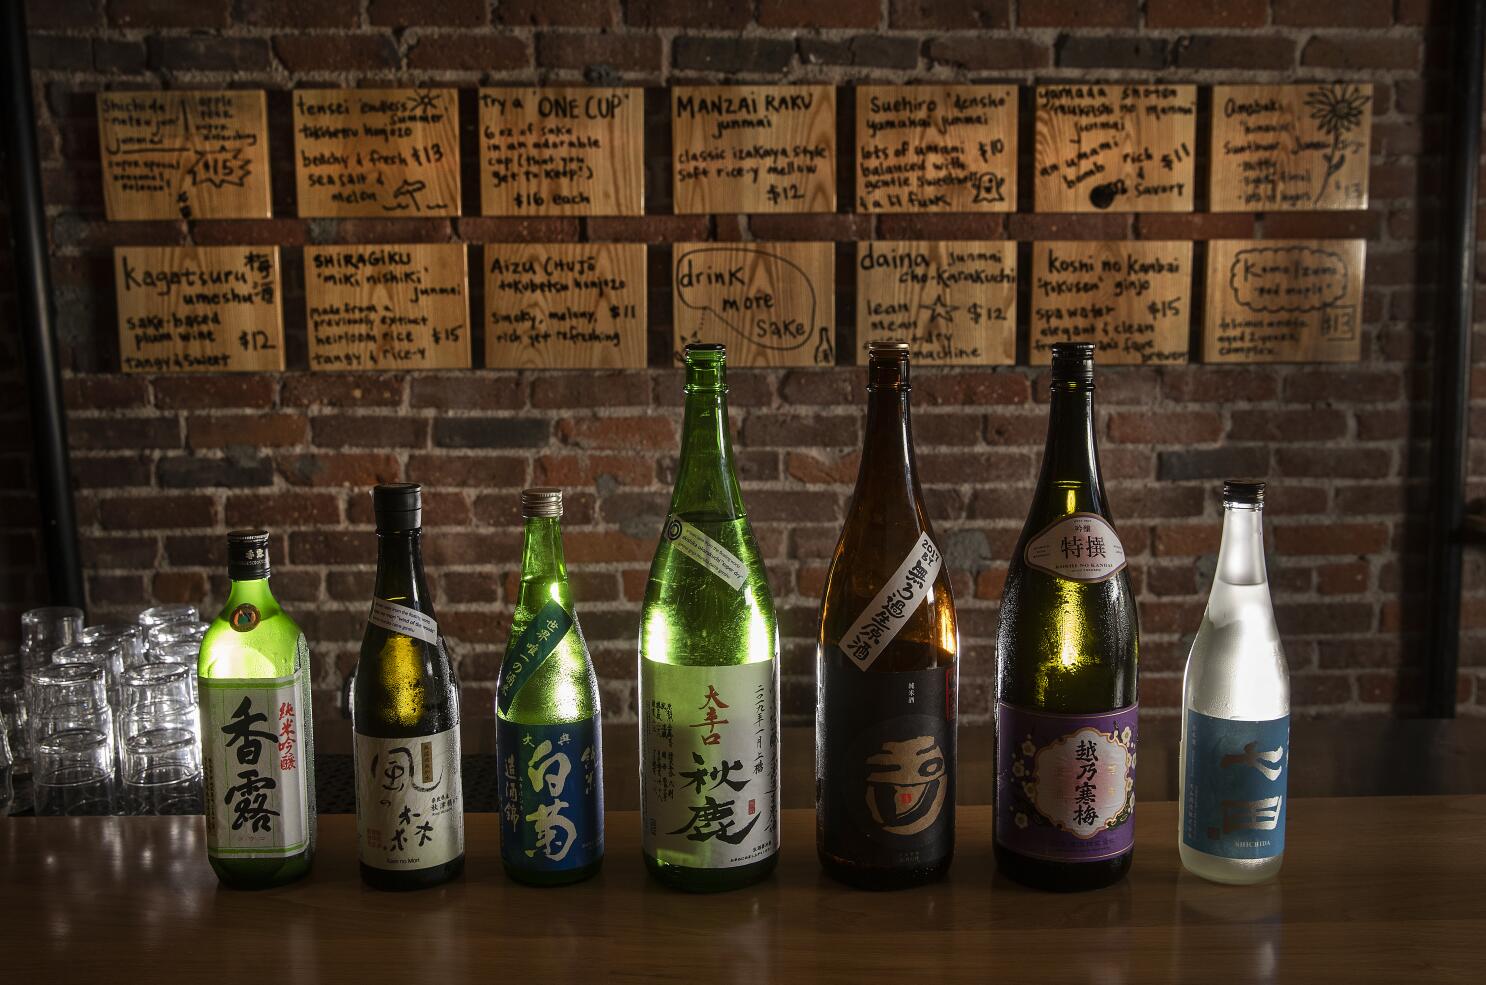 Los Angeles, this should be your sake spot - Los Angeles Times